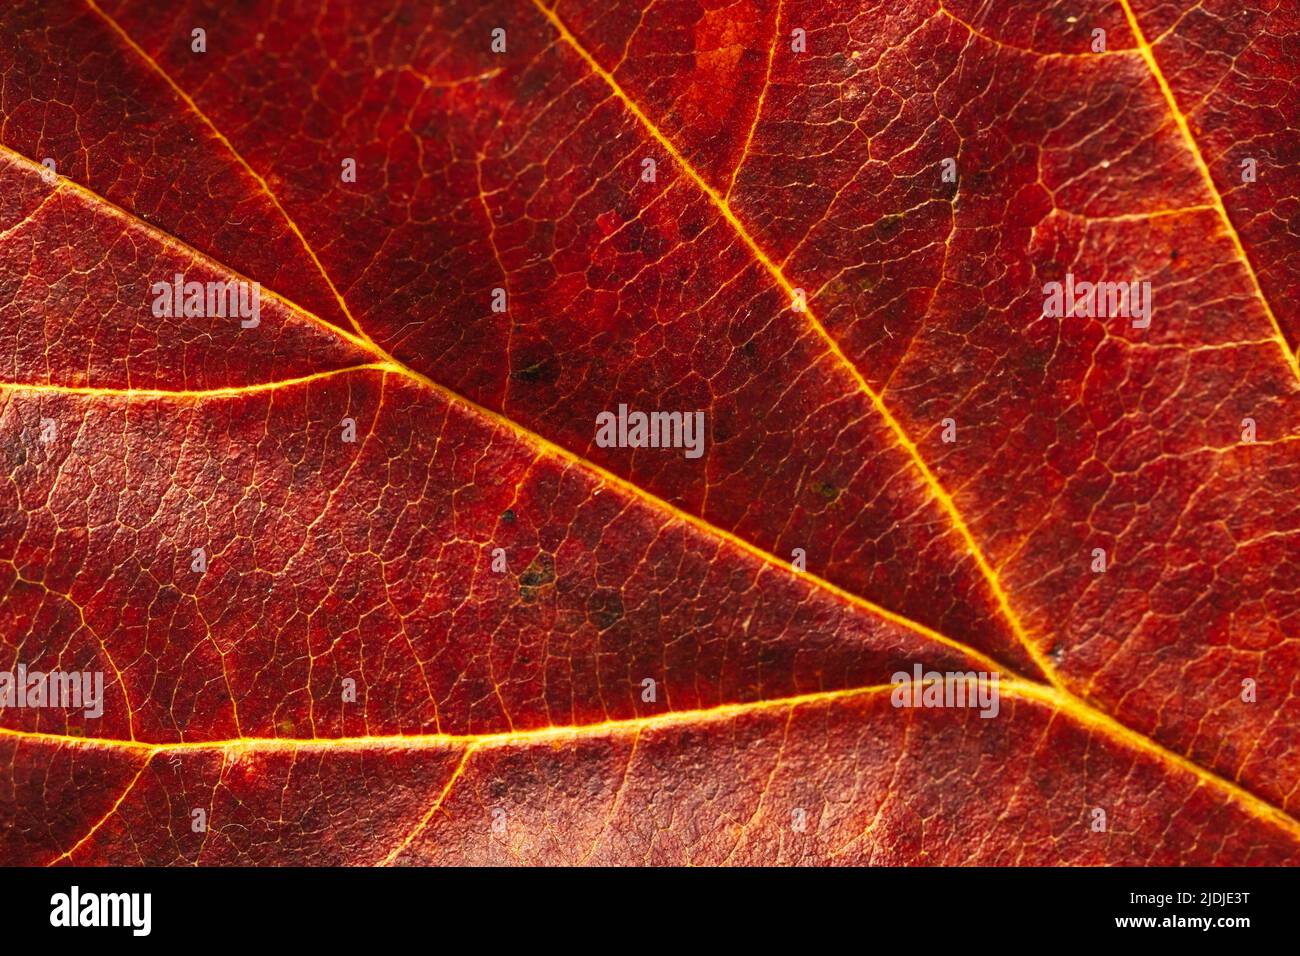 Texture of red autumn leaf. Macro shot. Nature background Stock Photo